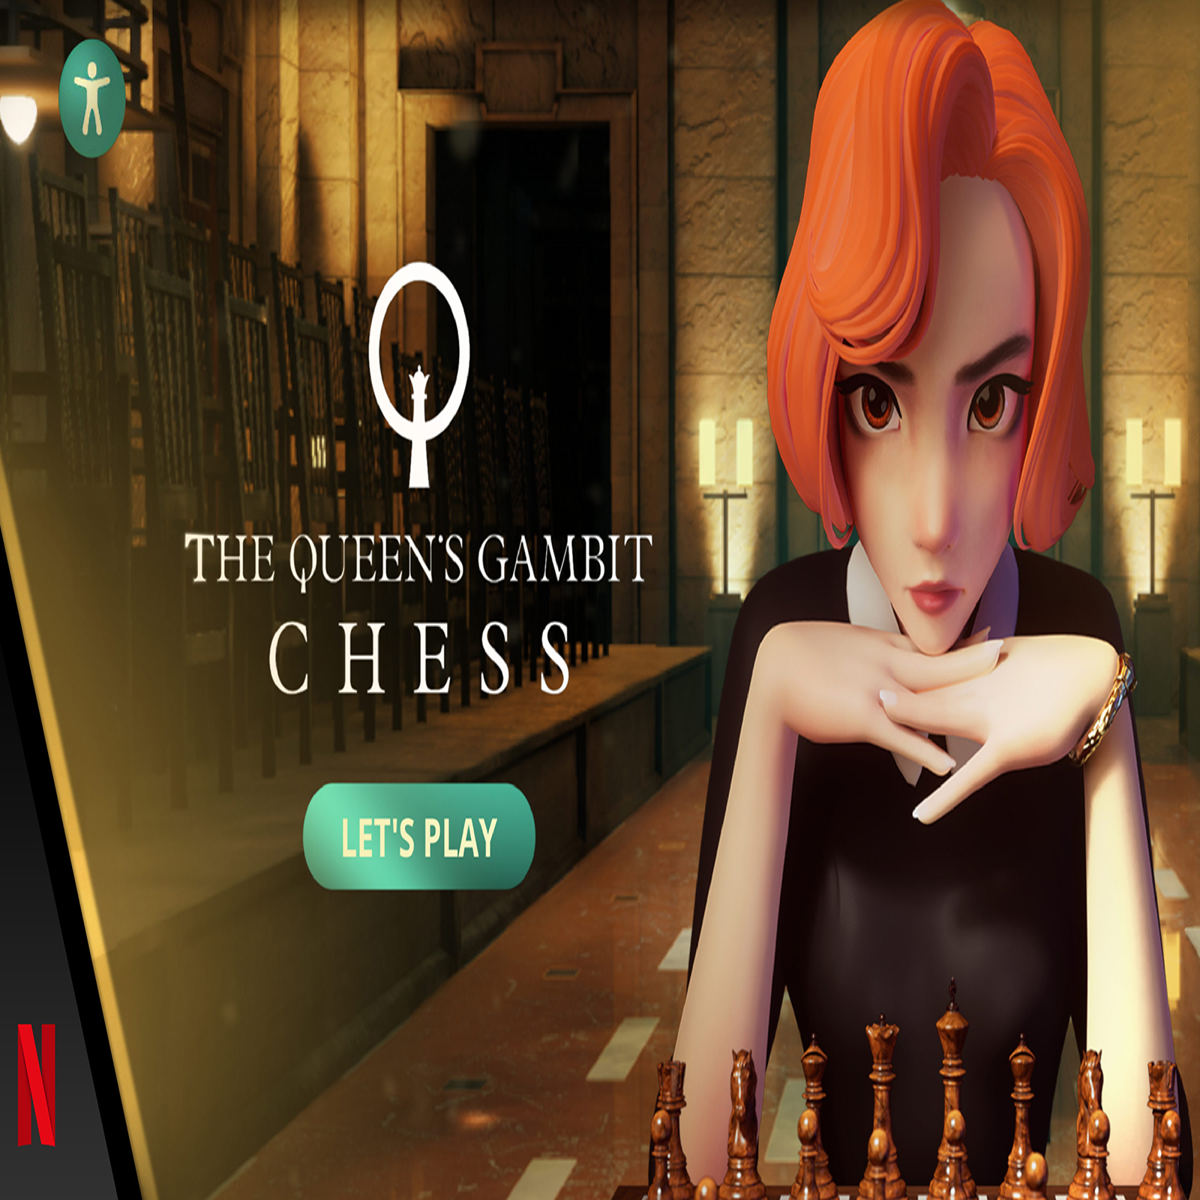 Play chess on Switch and mobile